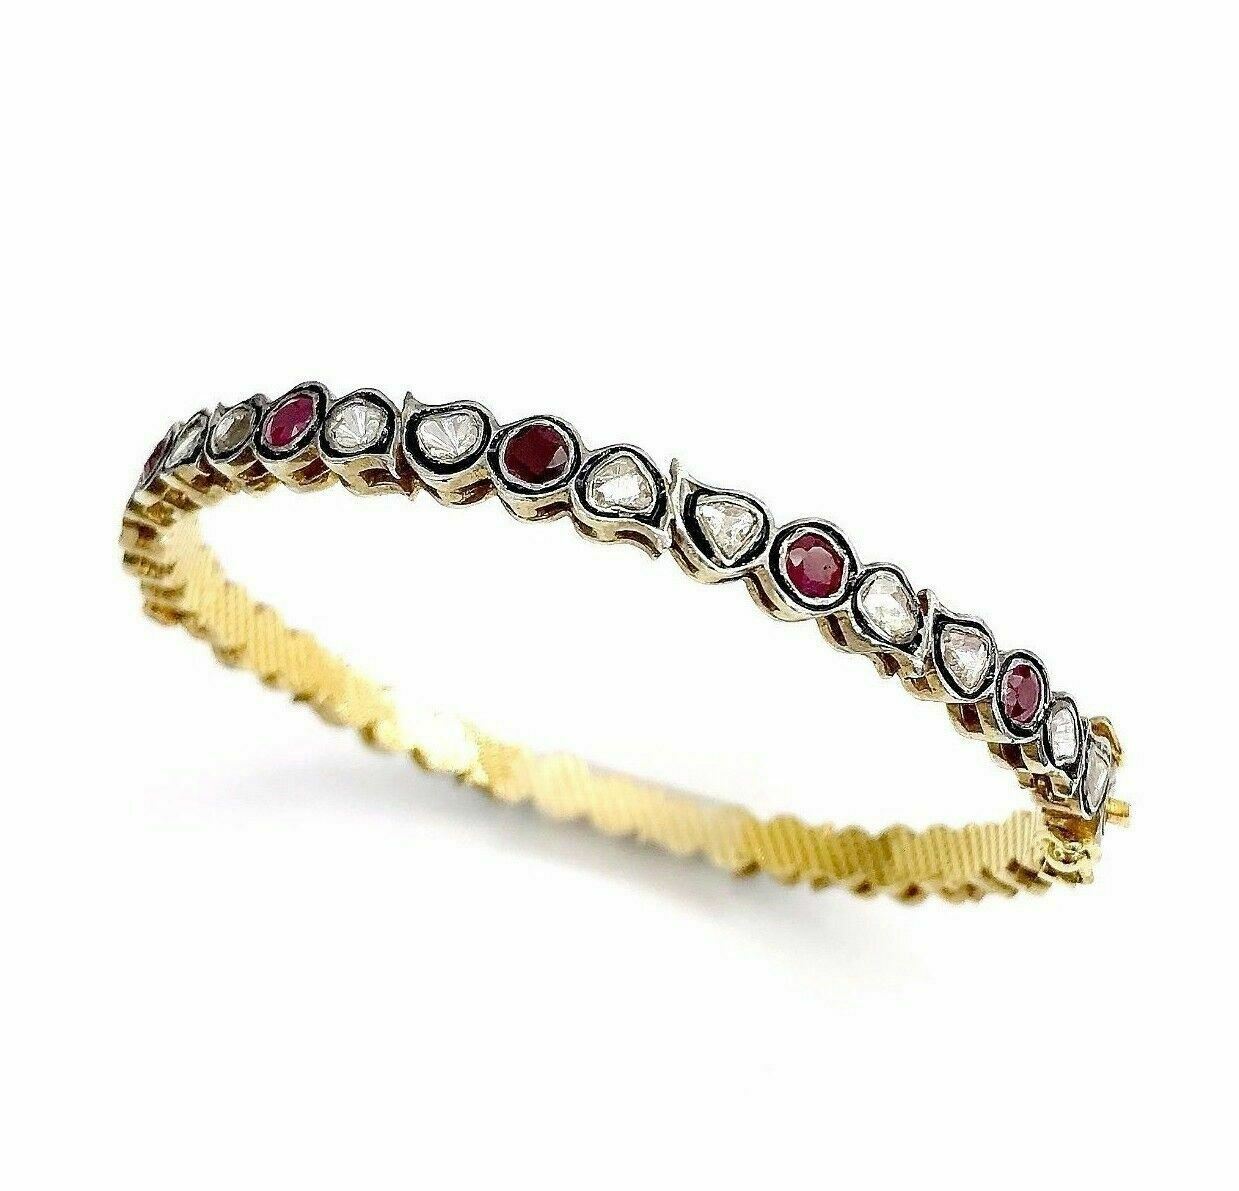 4.15 Cts Natural Rose Cut Diamond & Ruby Bangle/Bracelet 14k Gold and Silver